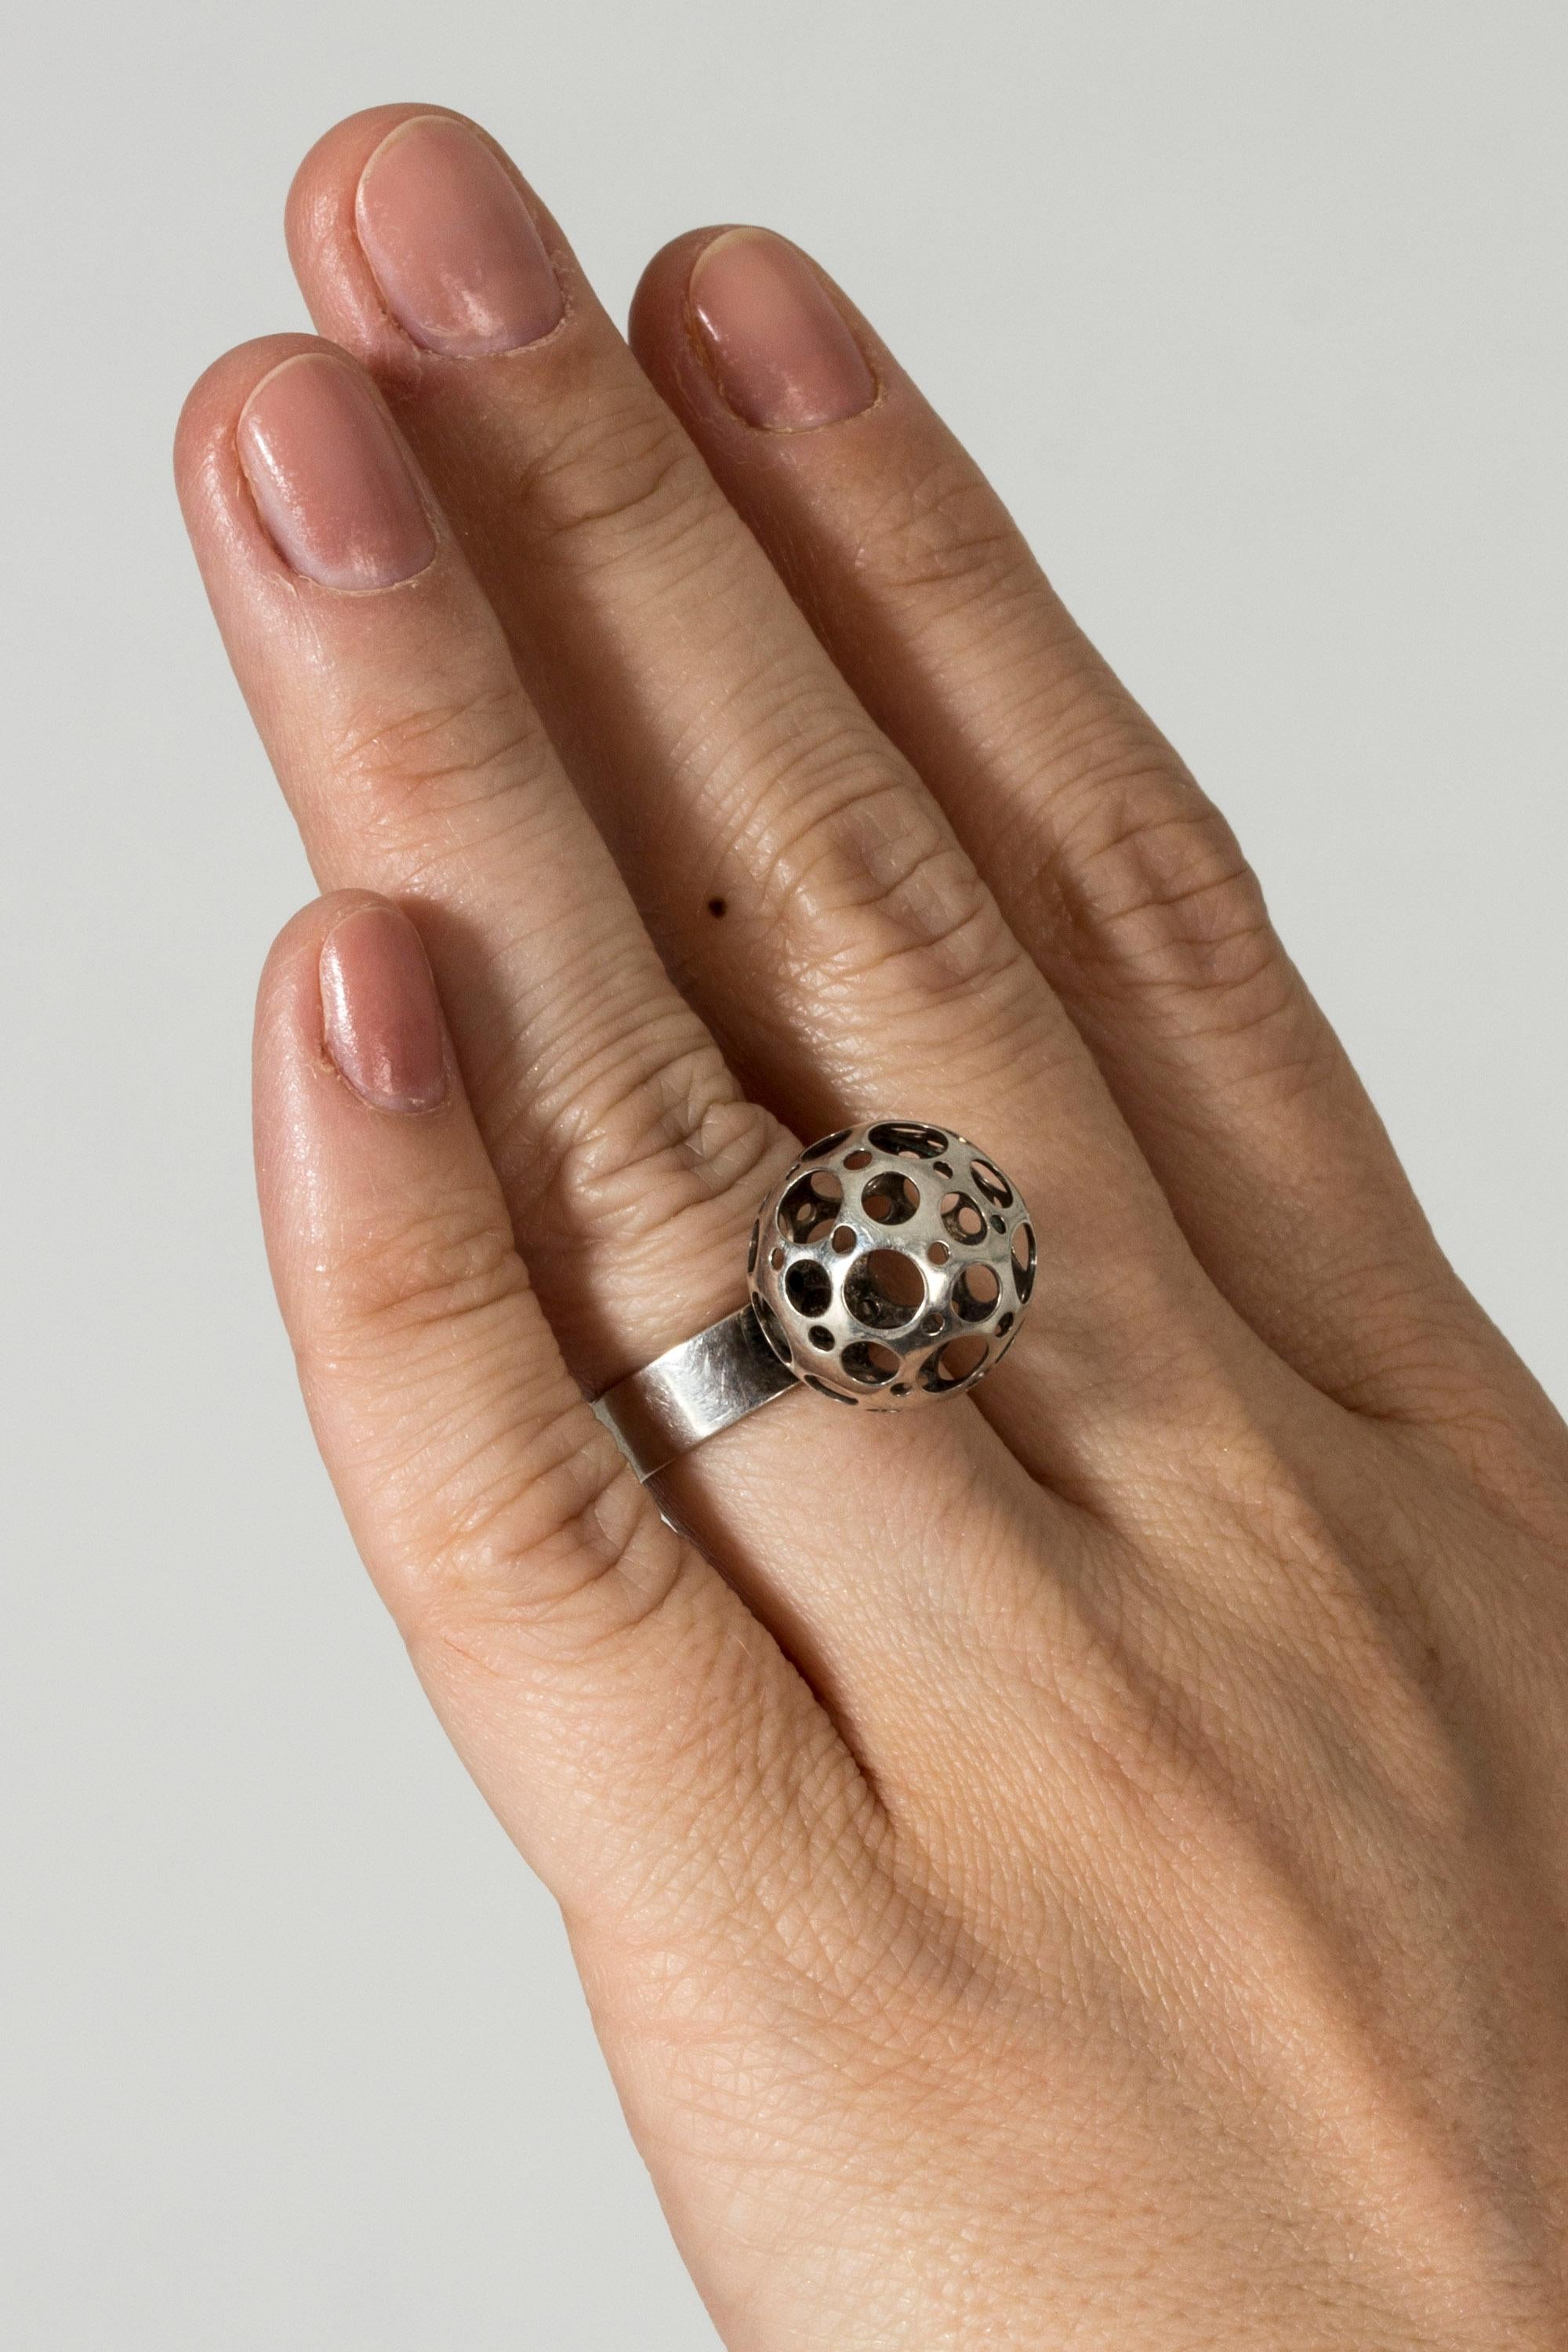 Beautiful silver “Ladybird” ring by Liisa Vitali, with an airy sphere perforated with holes. Lovely playful design.